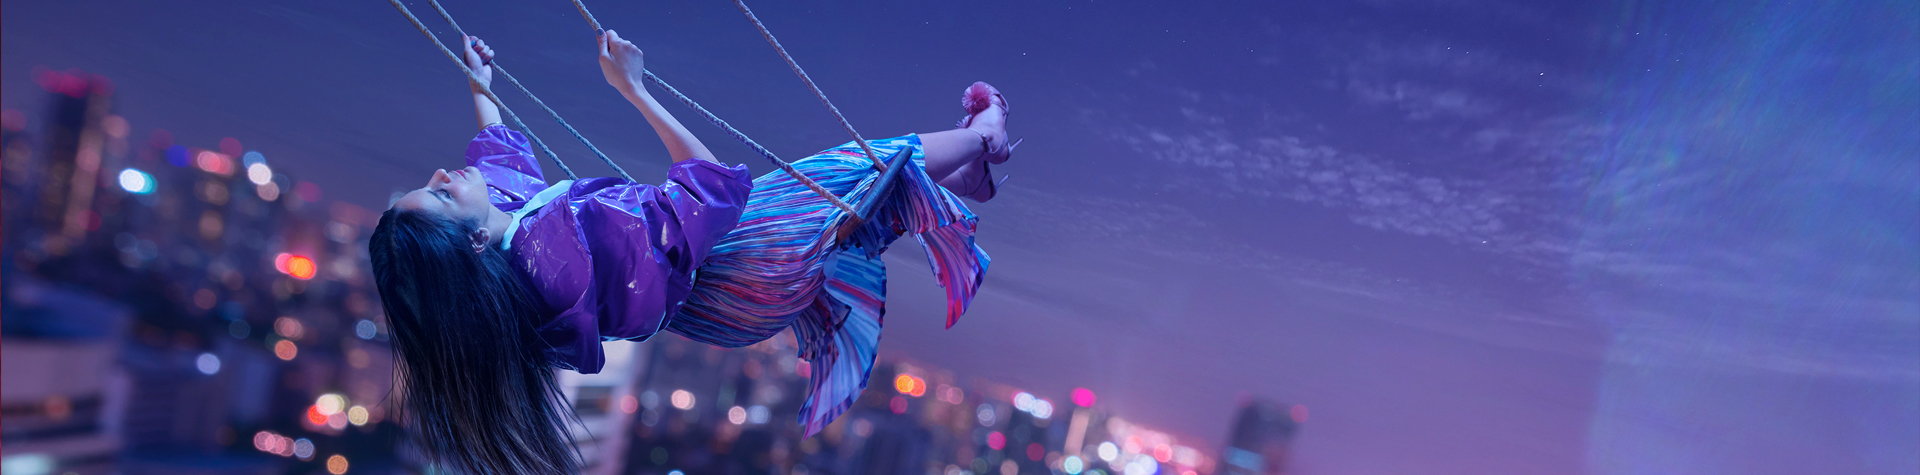 woman on a swing with a night view at background